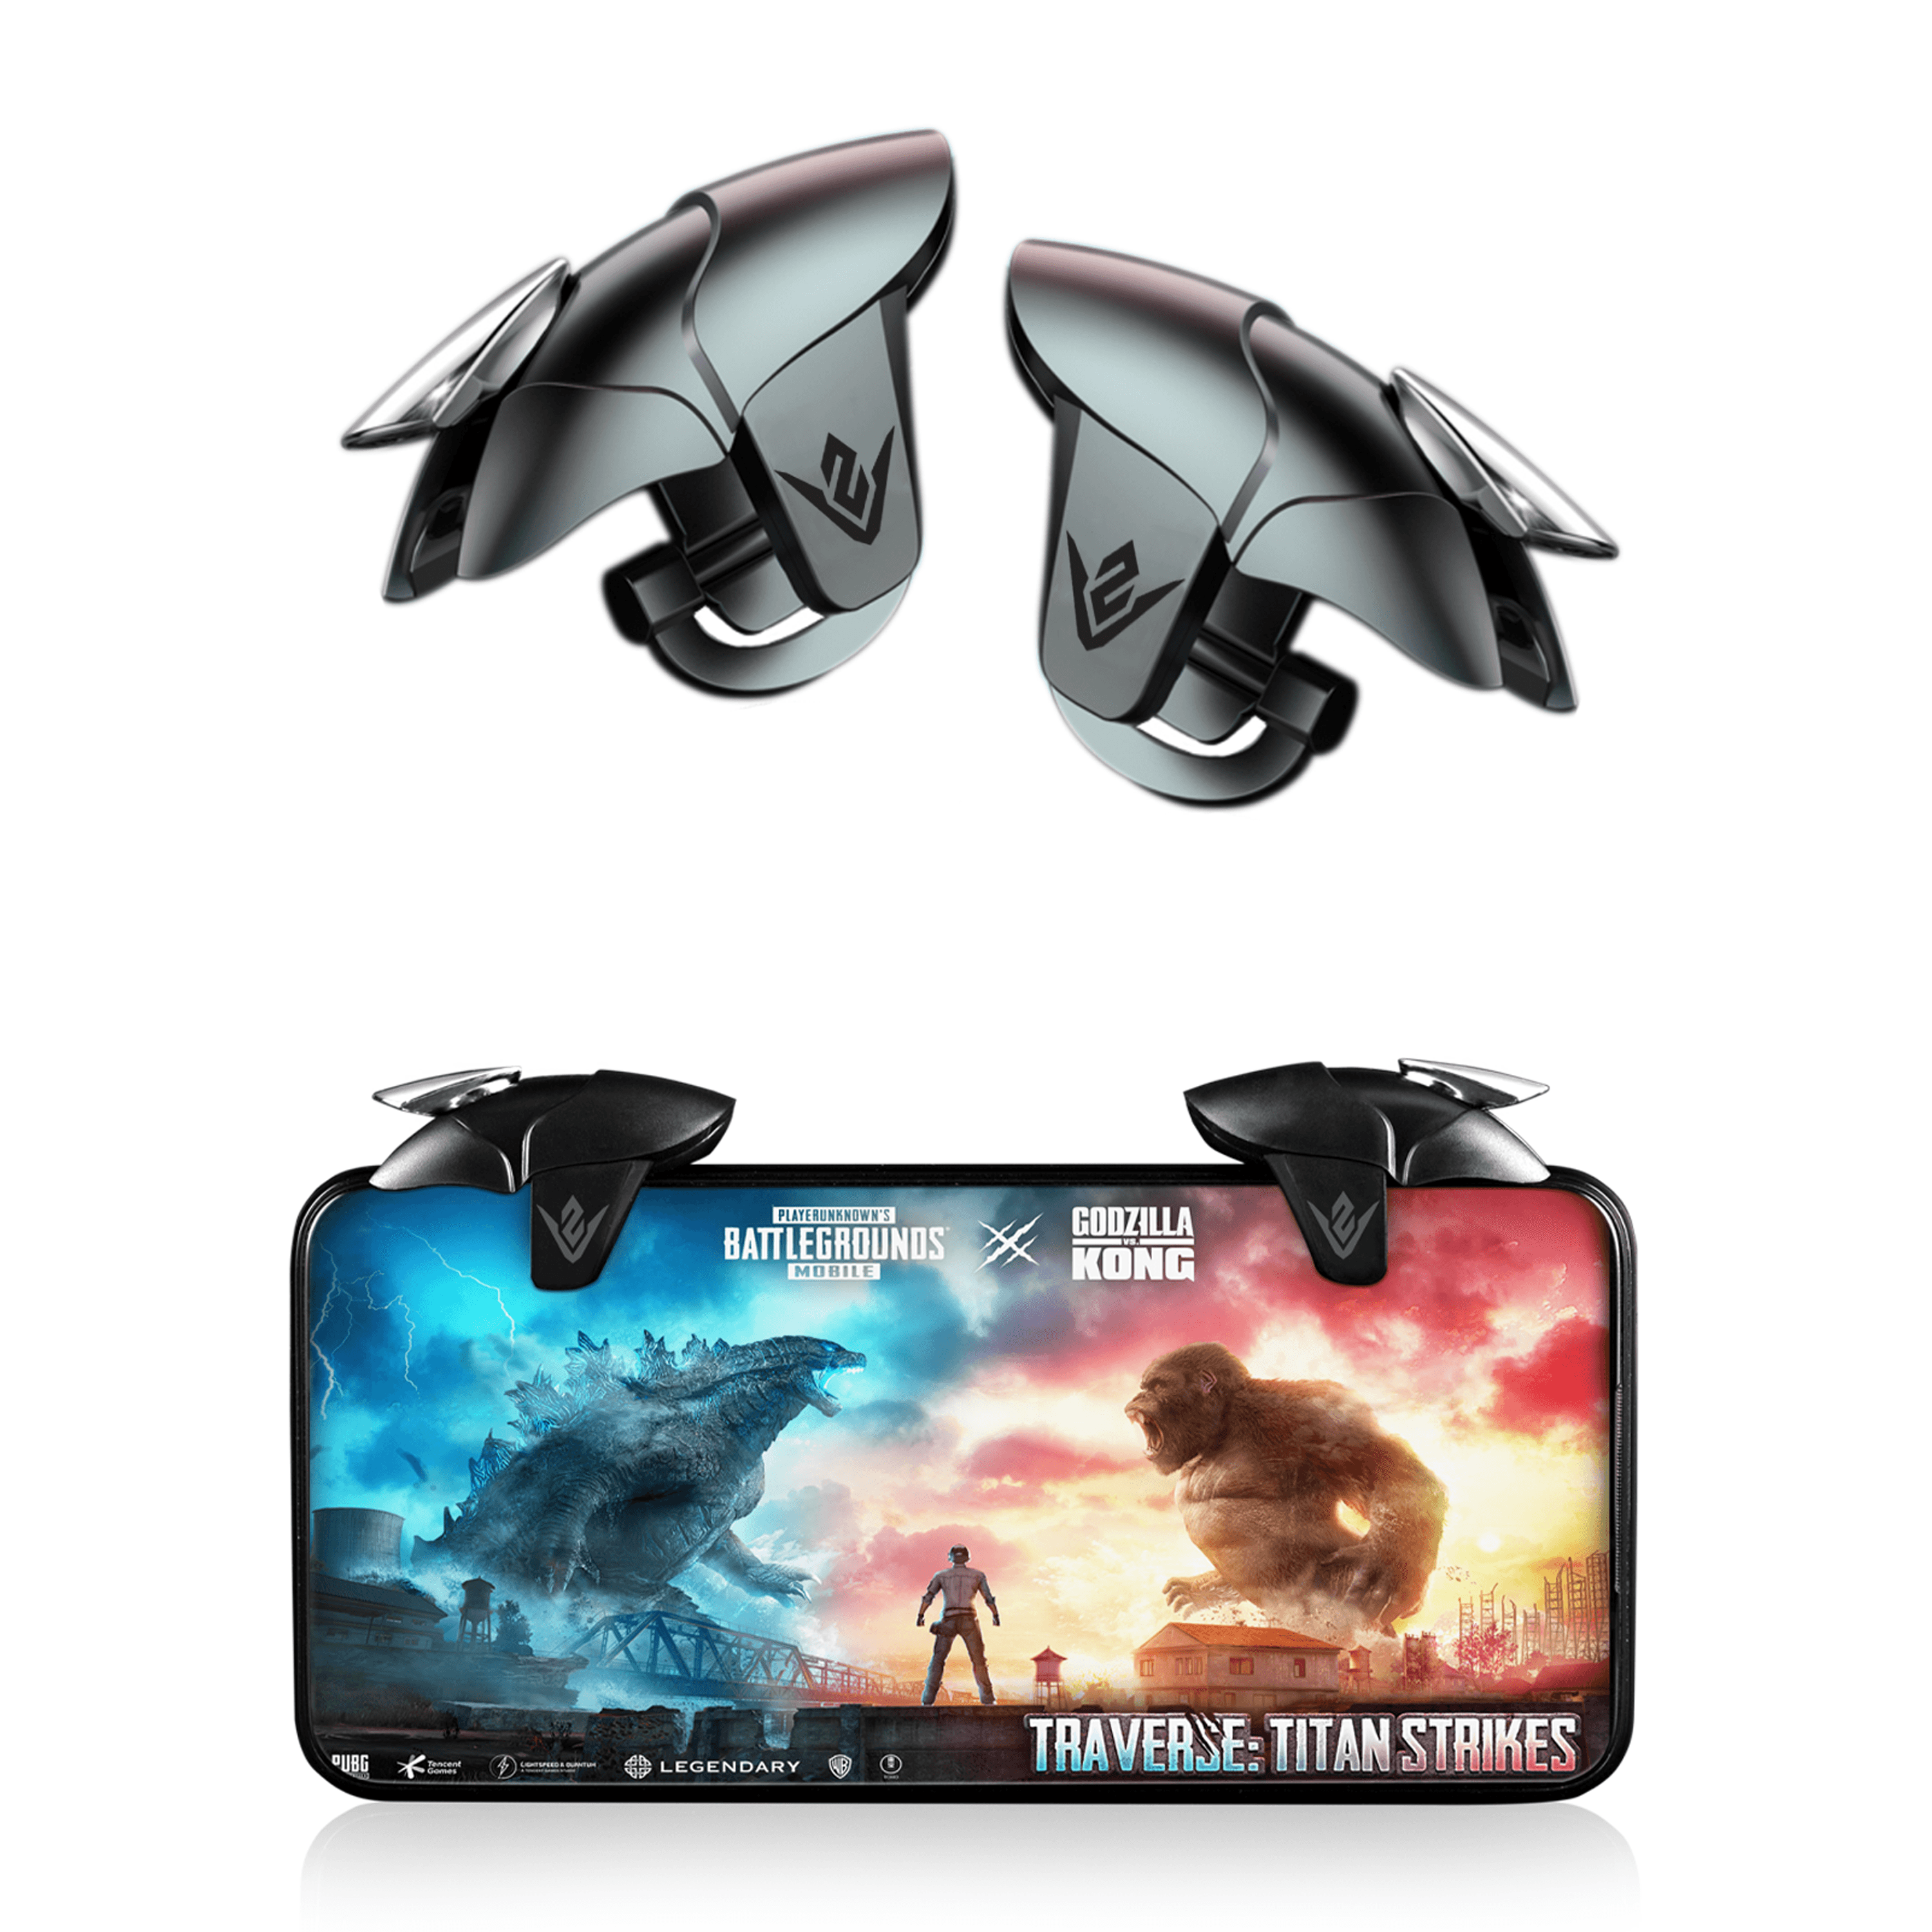 Black Shark - PUBG Shooter And Trigger Professional Mobile Game Console